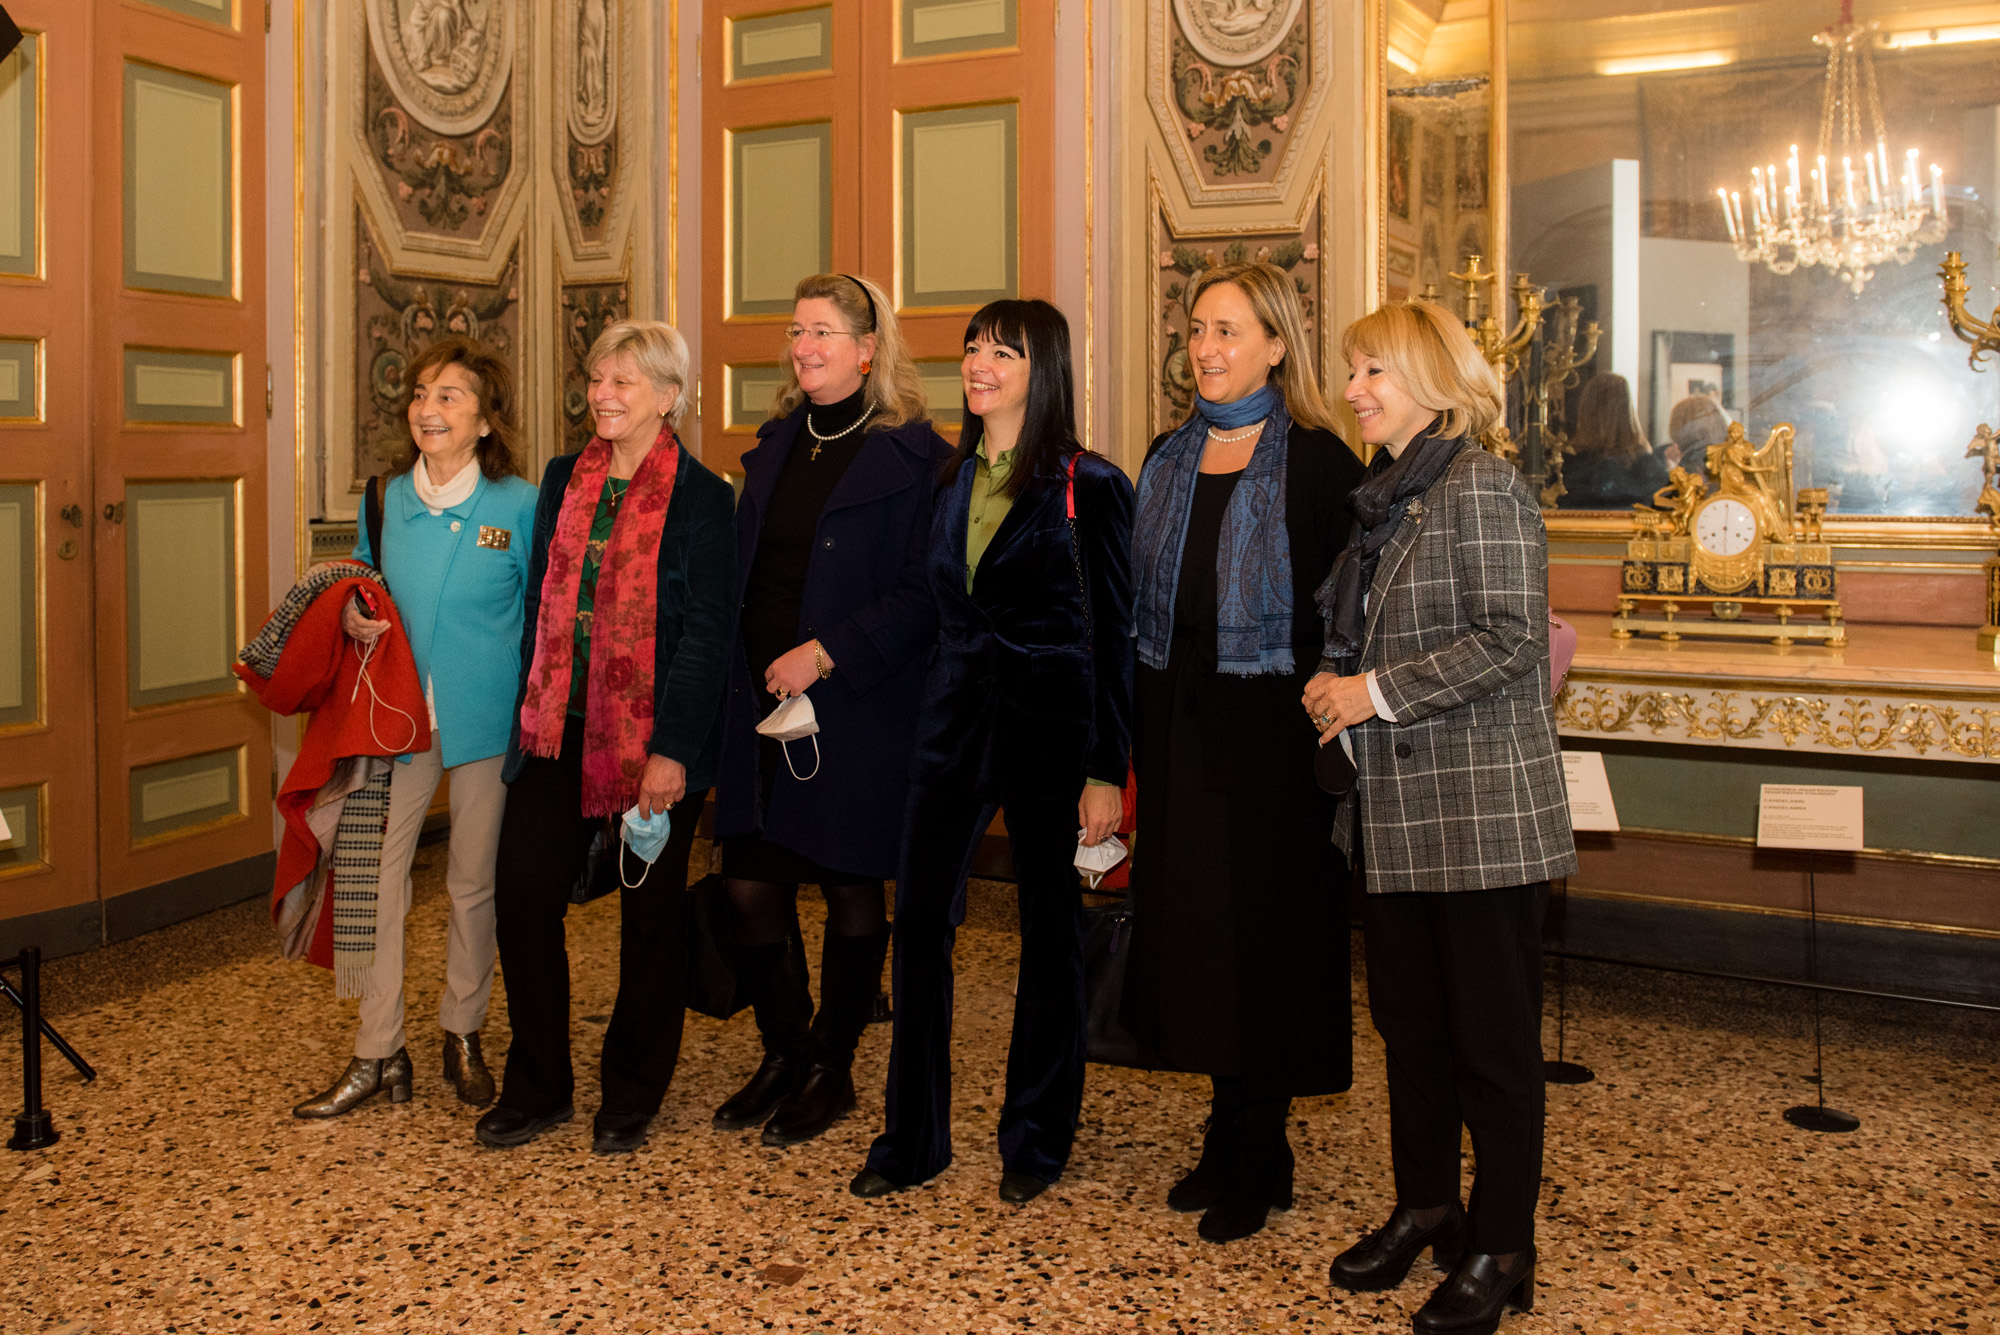 Opening of the exhibition “Portrayed. Women directors of Italian museaums” at Palazzo Reale, Milan